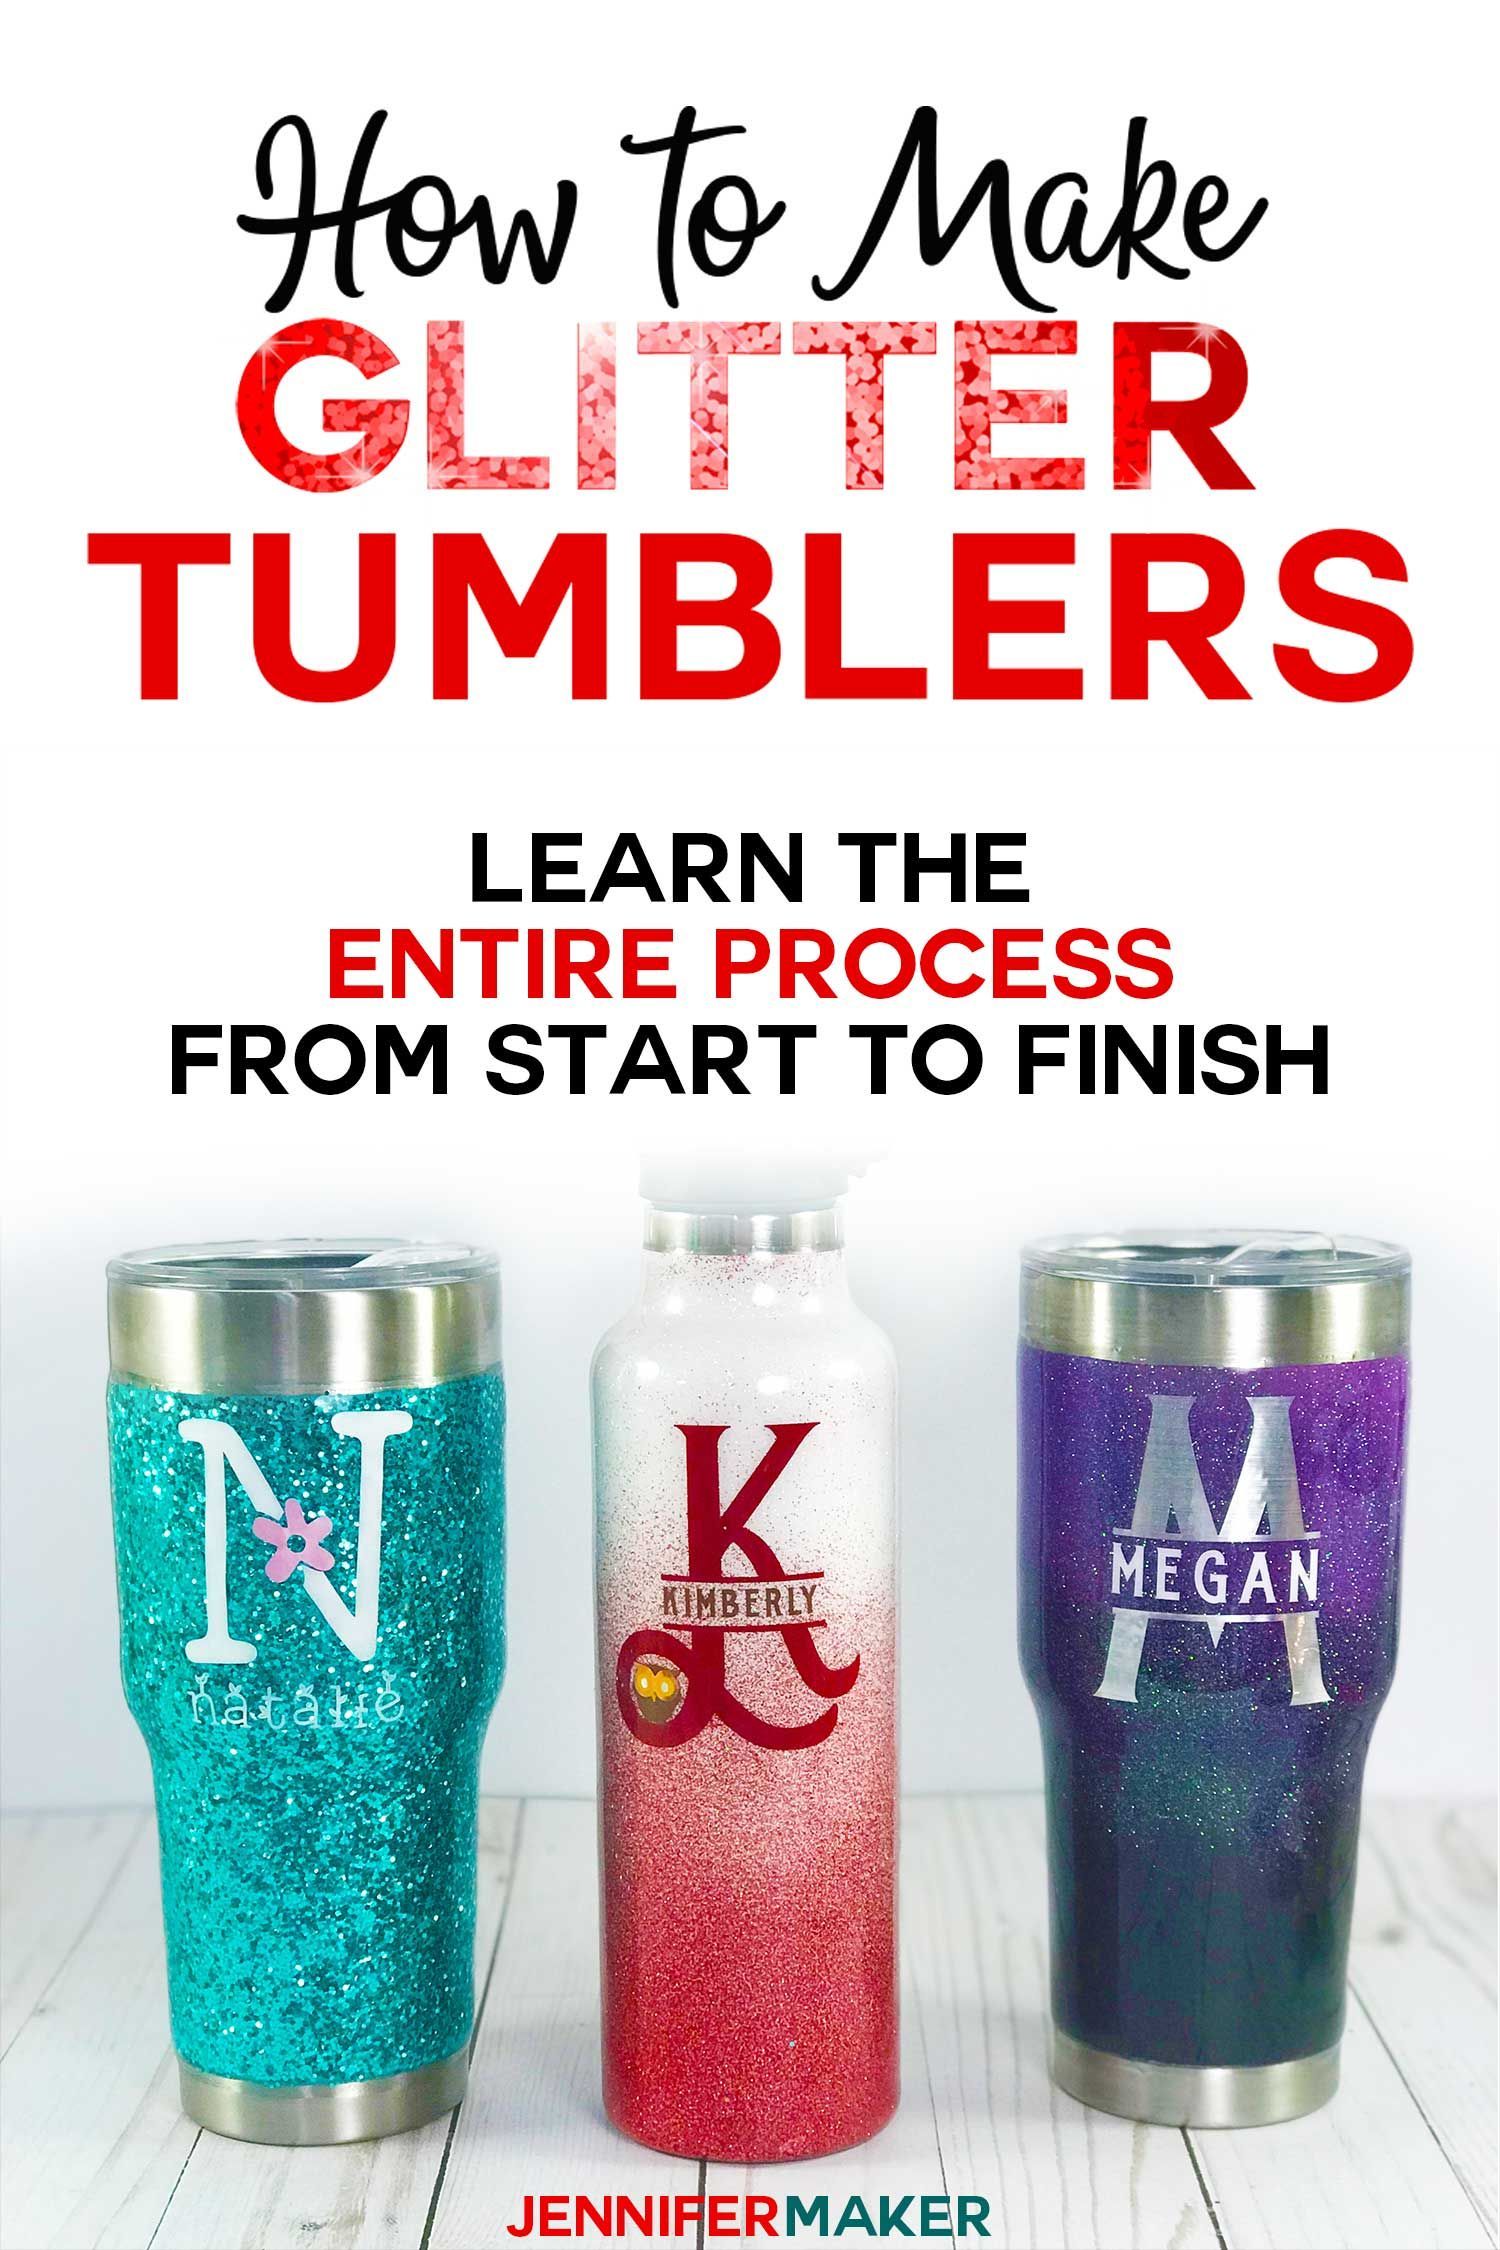 DIY Glitter Tumblers - Step-by-Step Photos & Video Tutorial -   19 diy projects Creative cool ideas